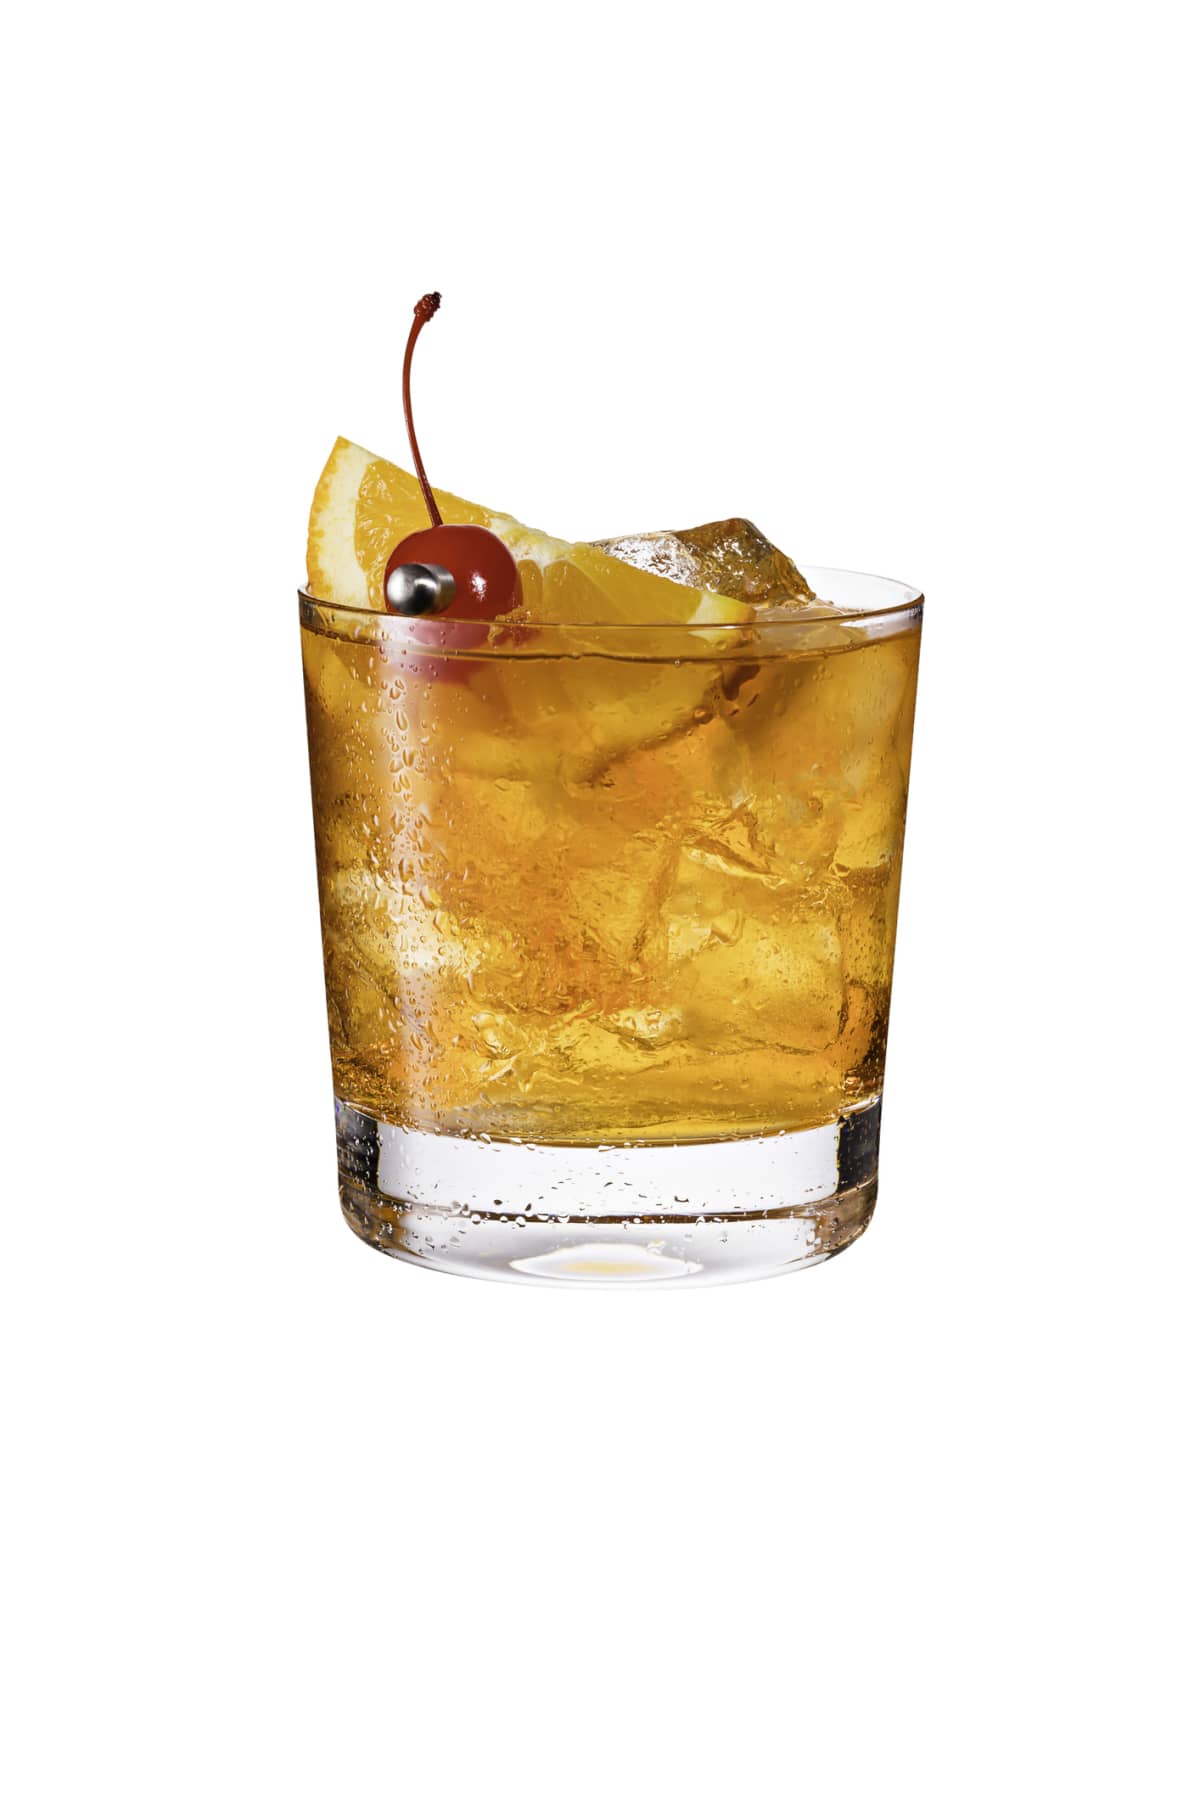 Refreshing Bourbon Old Fashioned Cocktail on White with a Clipping Path